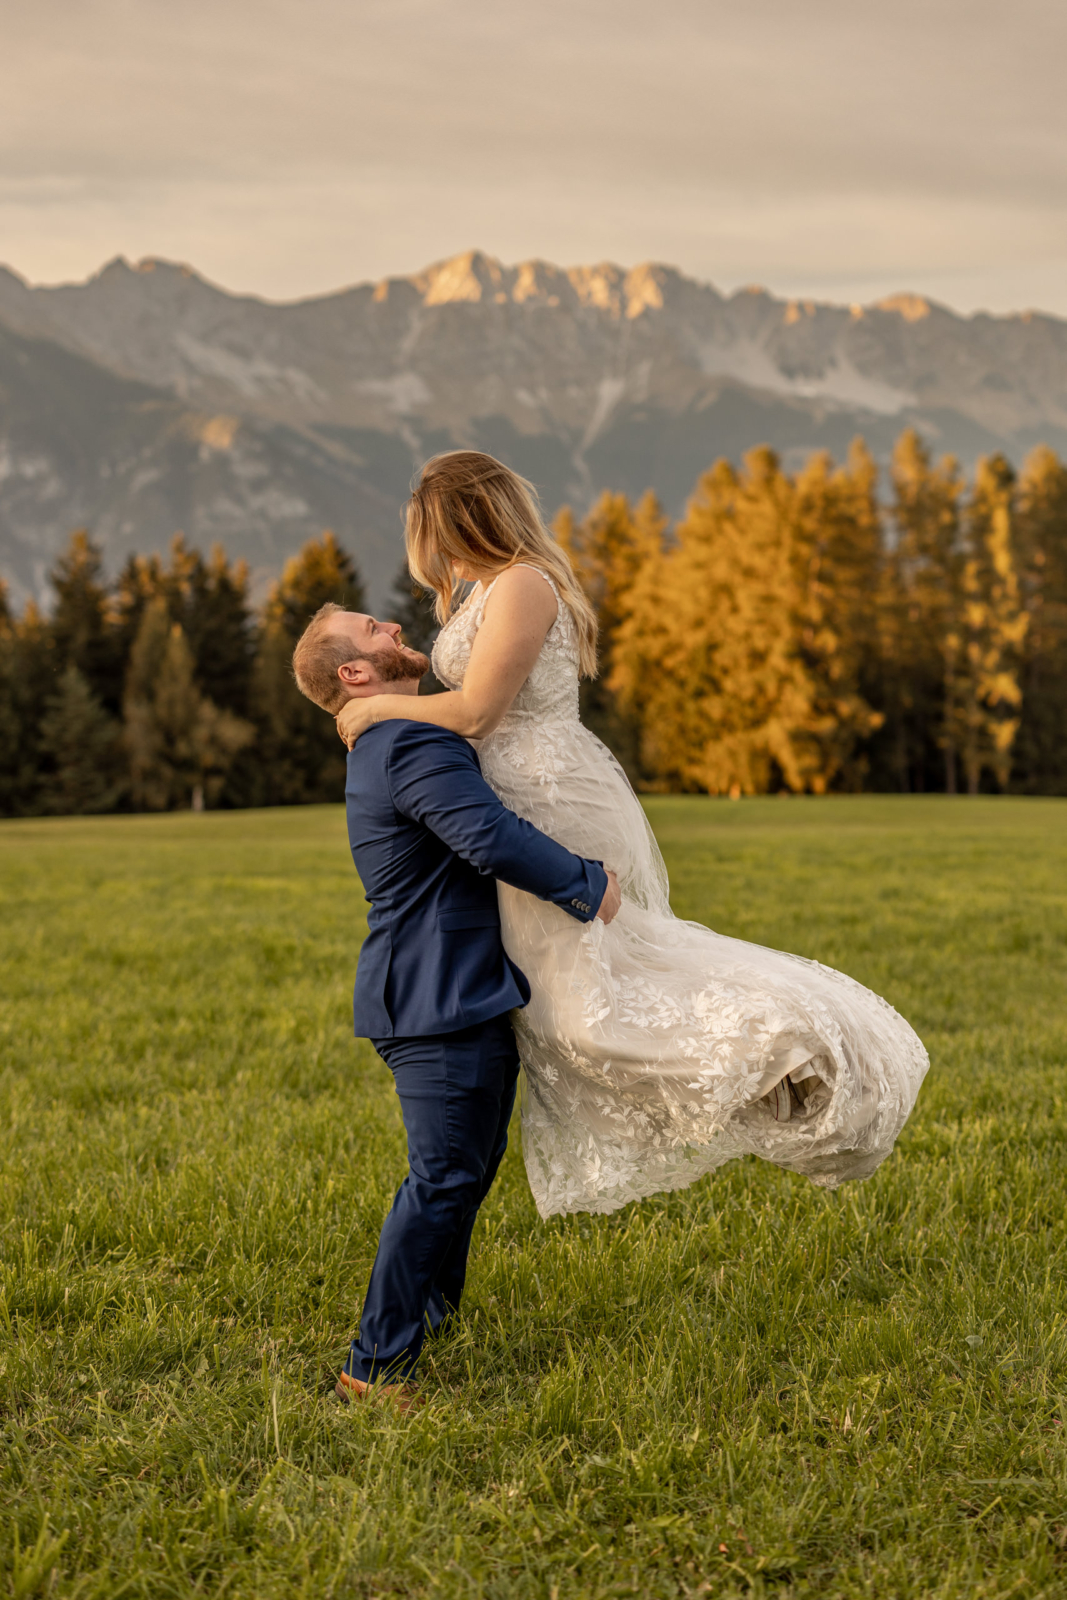 Sunset photos for the Intimate Mountain Elopement on Nordkette in Innsbruck, Tyrol